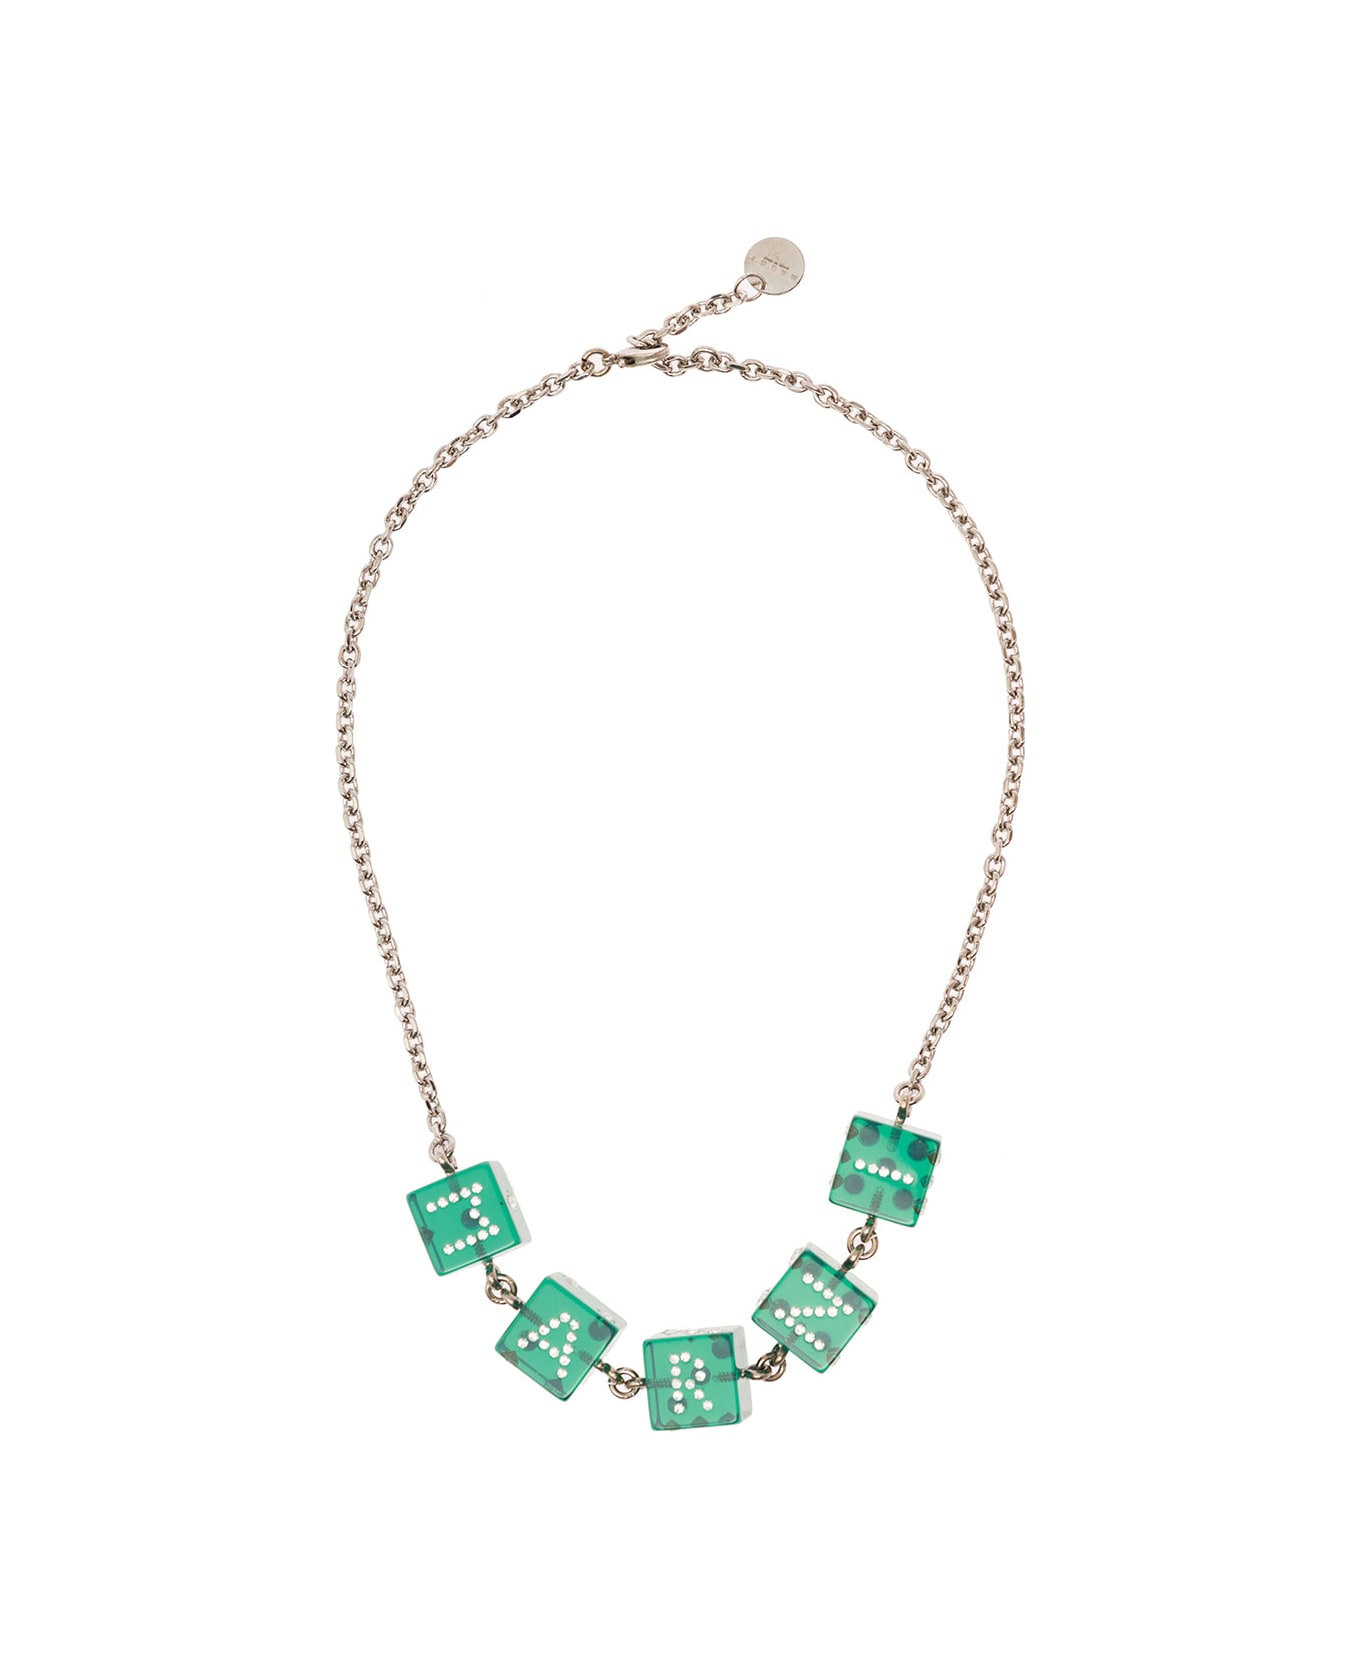 Marni Chain Necklace With Branded Dice-shaped Charms In Green Transparent Resin Woman - Green ネックレス